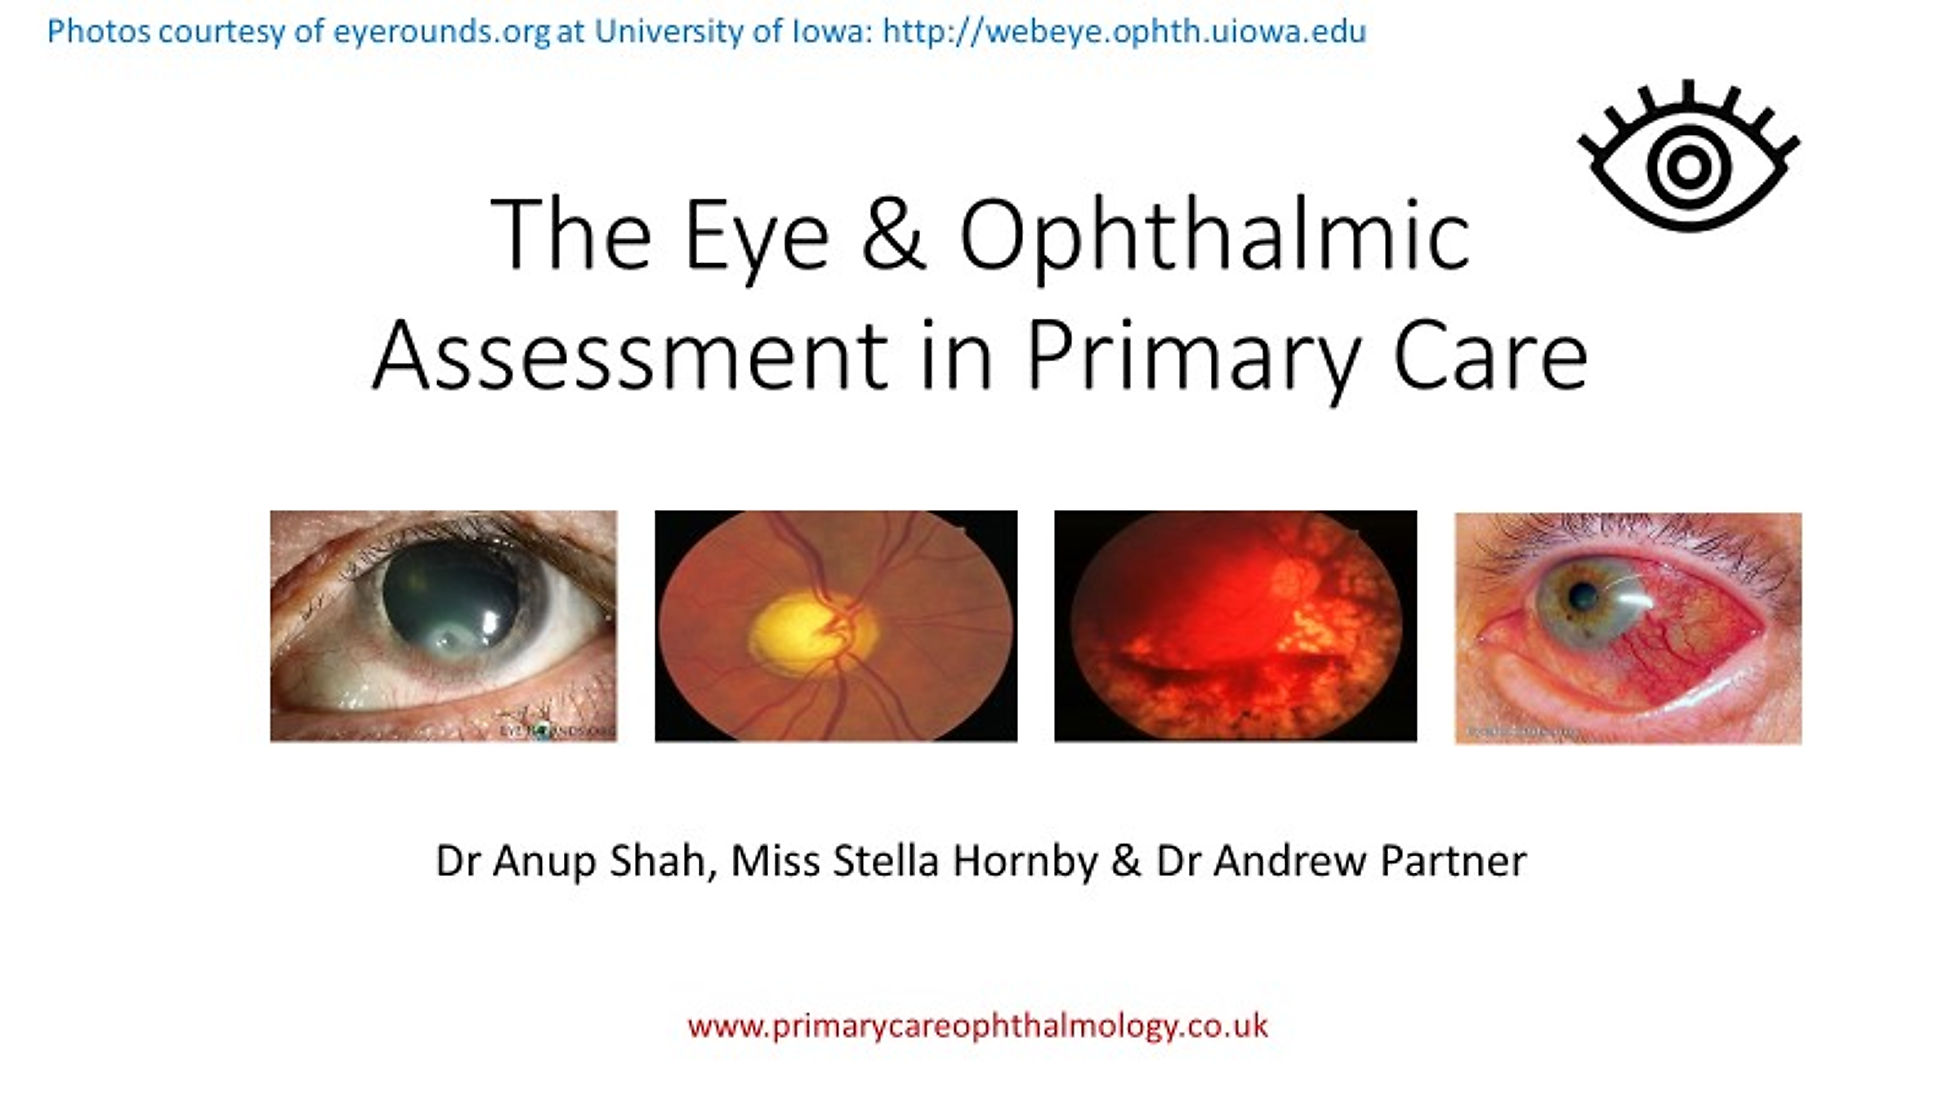 The Eye & Ophthalmic Assessment in Primary Care